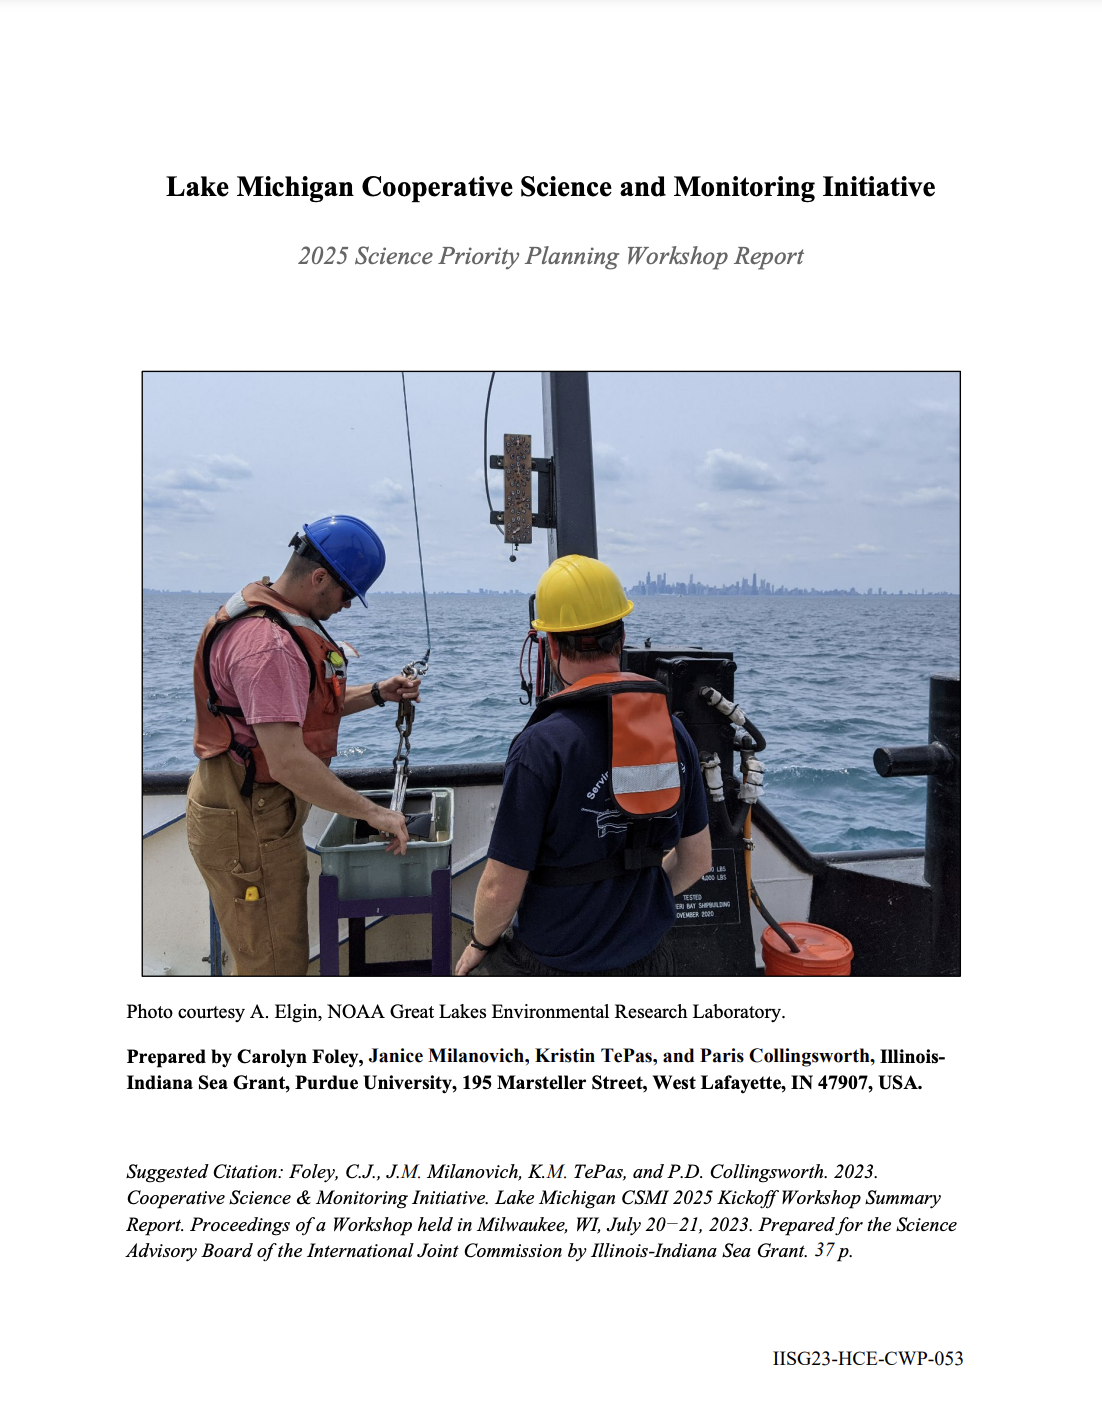 Lake Michigan Cooperative Science and Monitoring Initiative: 2025 Science Priority Planning Workshop Report Thumbnail